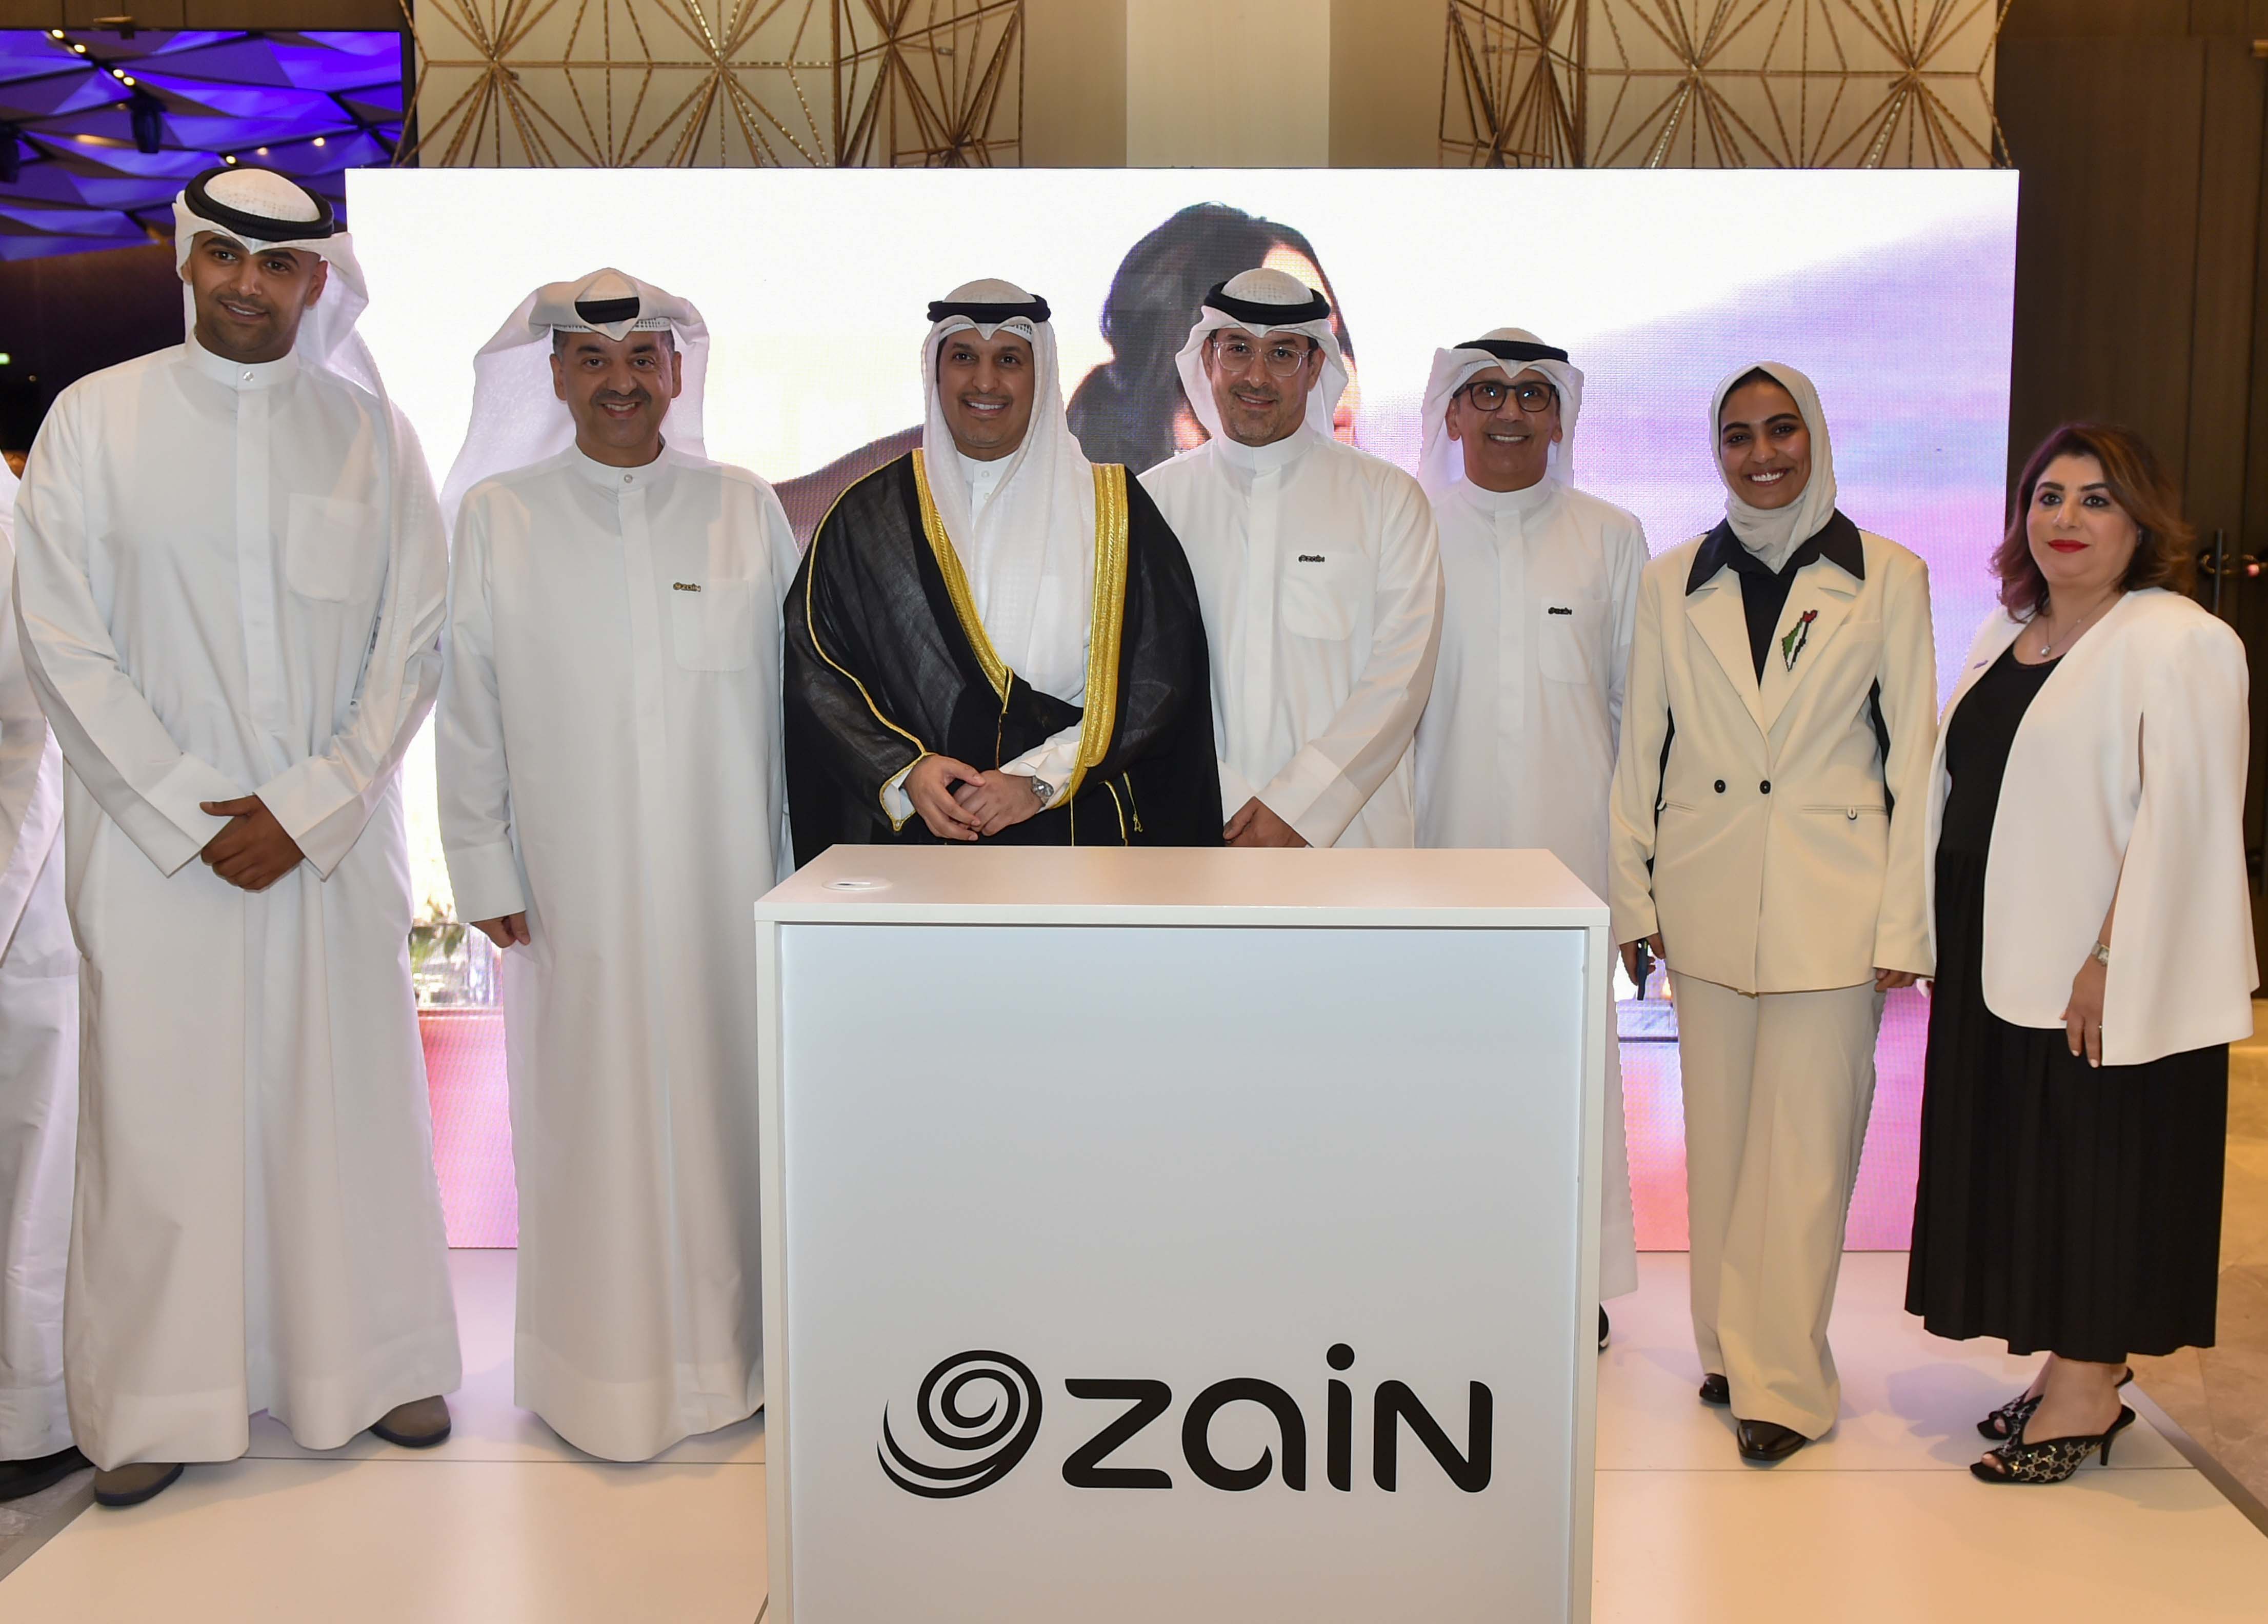 Zain: 5G and AI innovations accelerated reliance on data